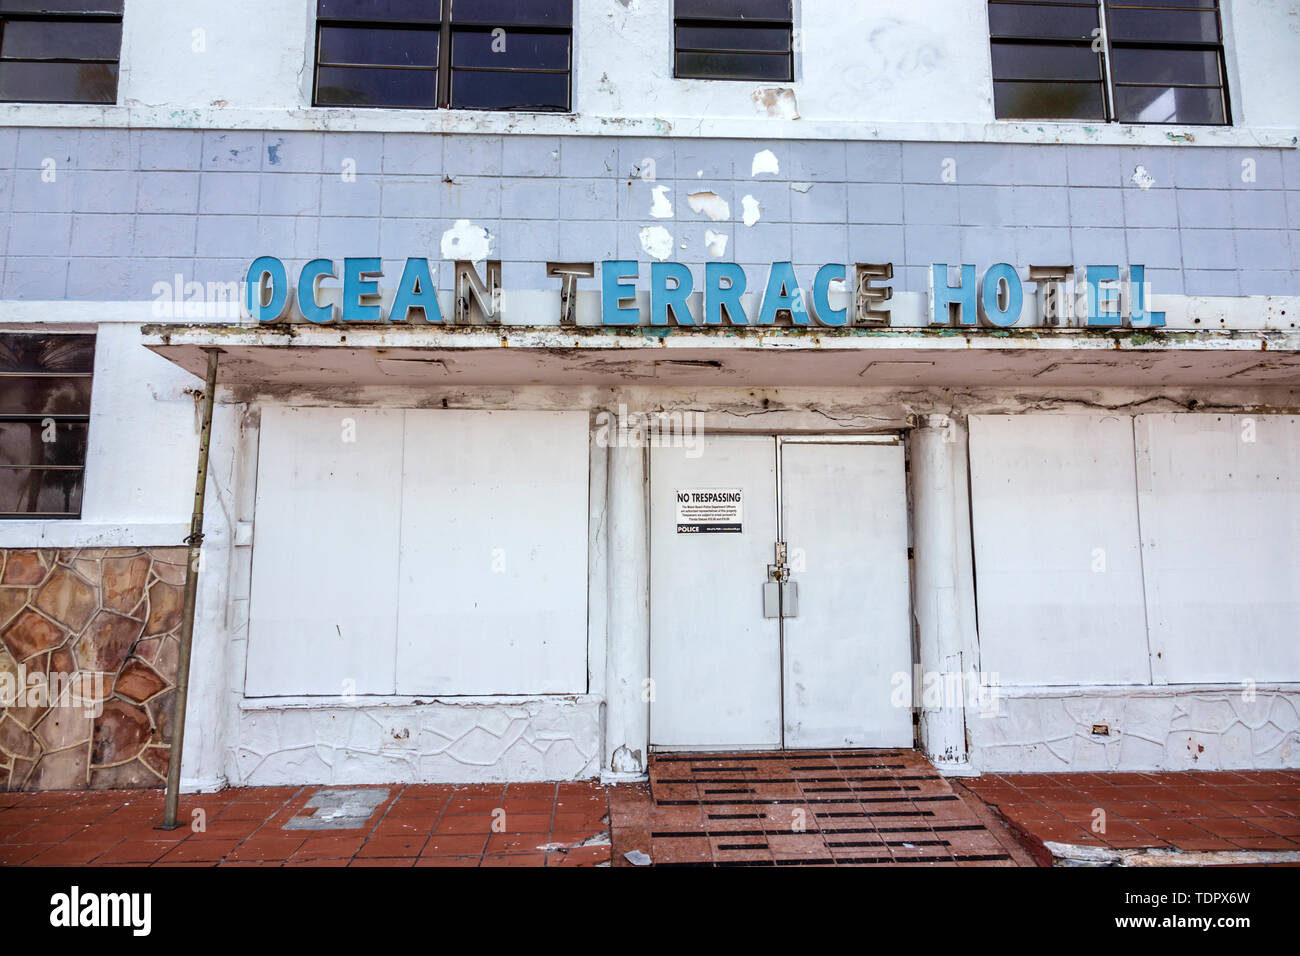 Miami Beach Florida,North Beach,Ocean Terrace,abandoned vacant empty building,blighted,boarded up,no trespassing sign,former hotel,FL190104027 Stock Photo